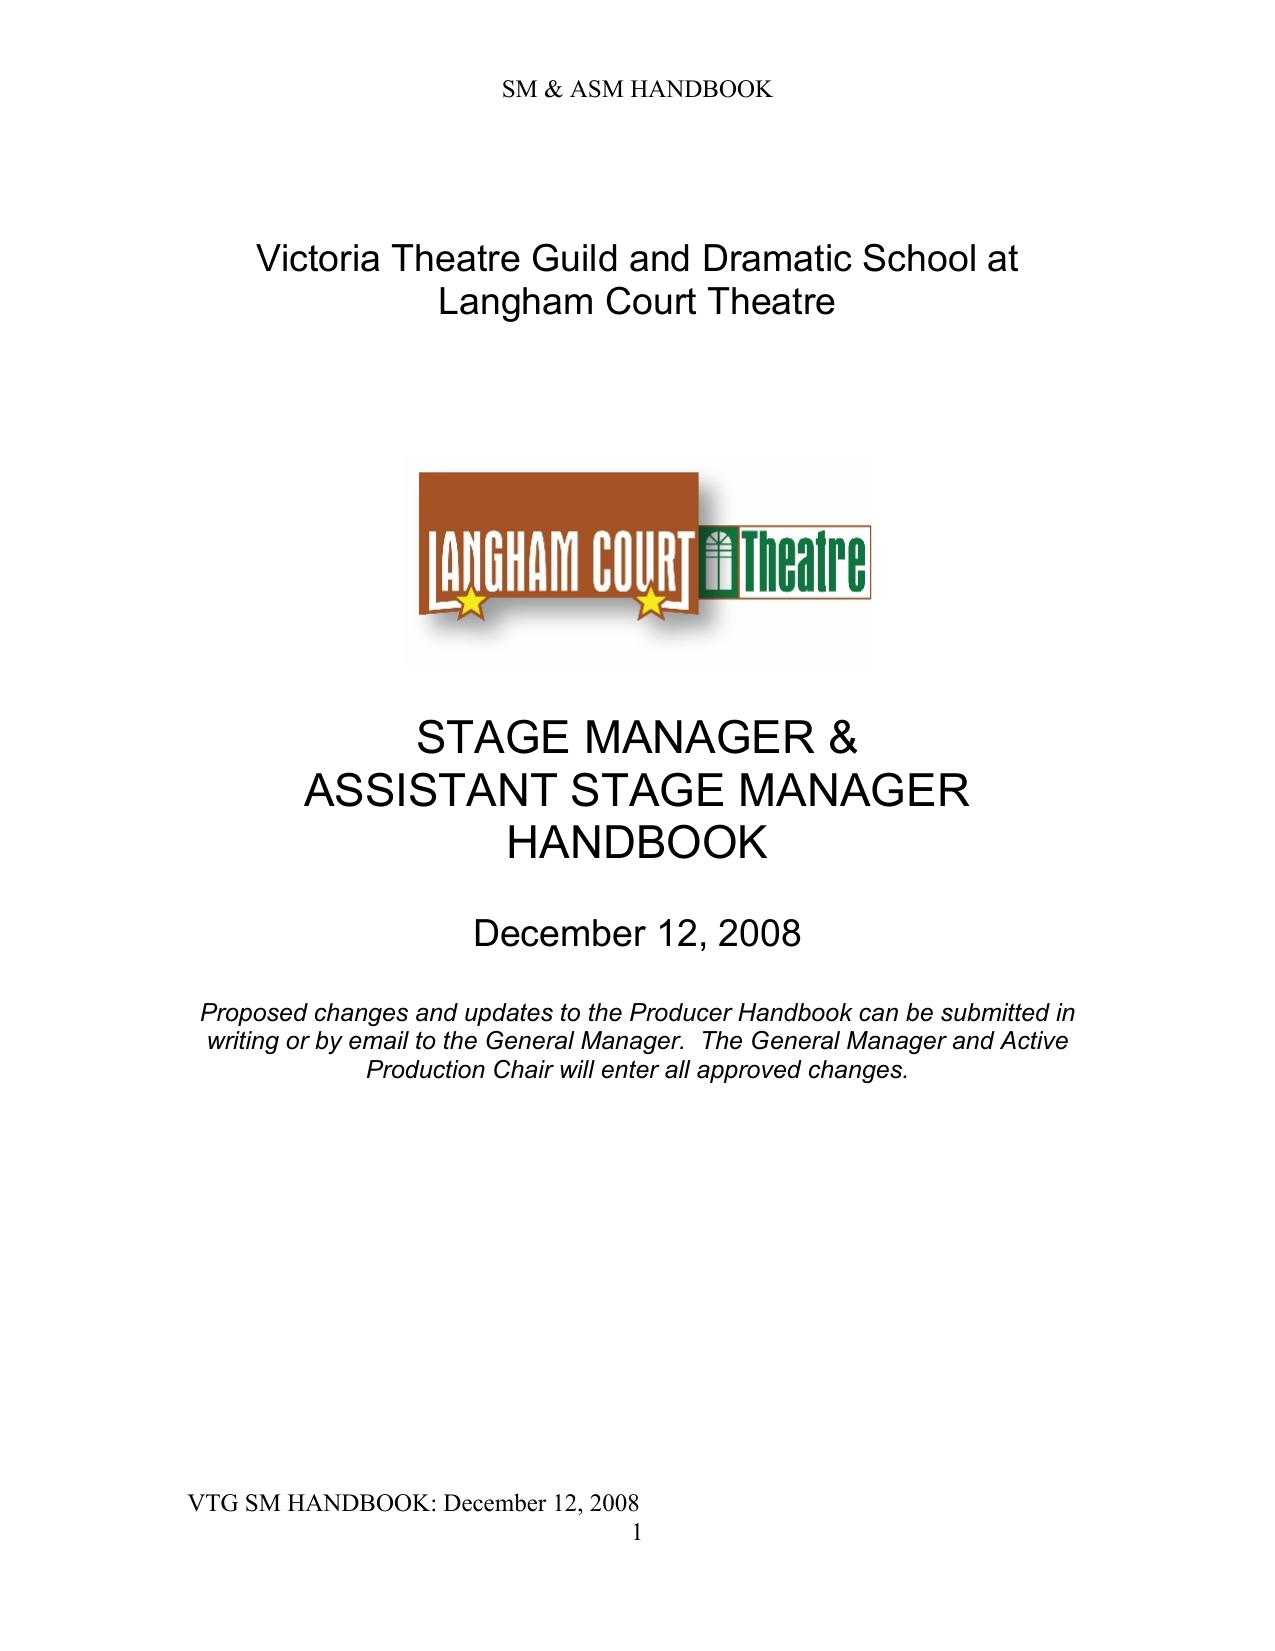 STAGE MANAGER & ASSISTANT STAGE MANAGER  HANDBOOK 2008